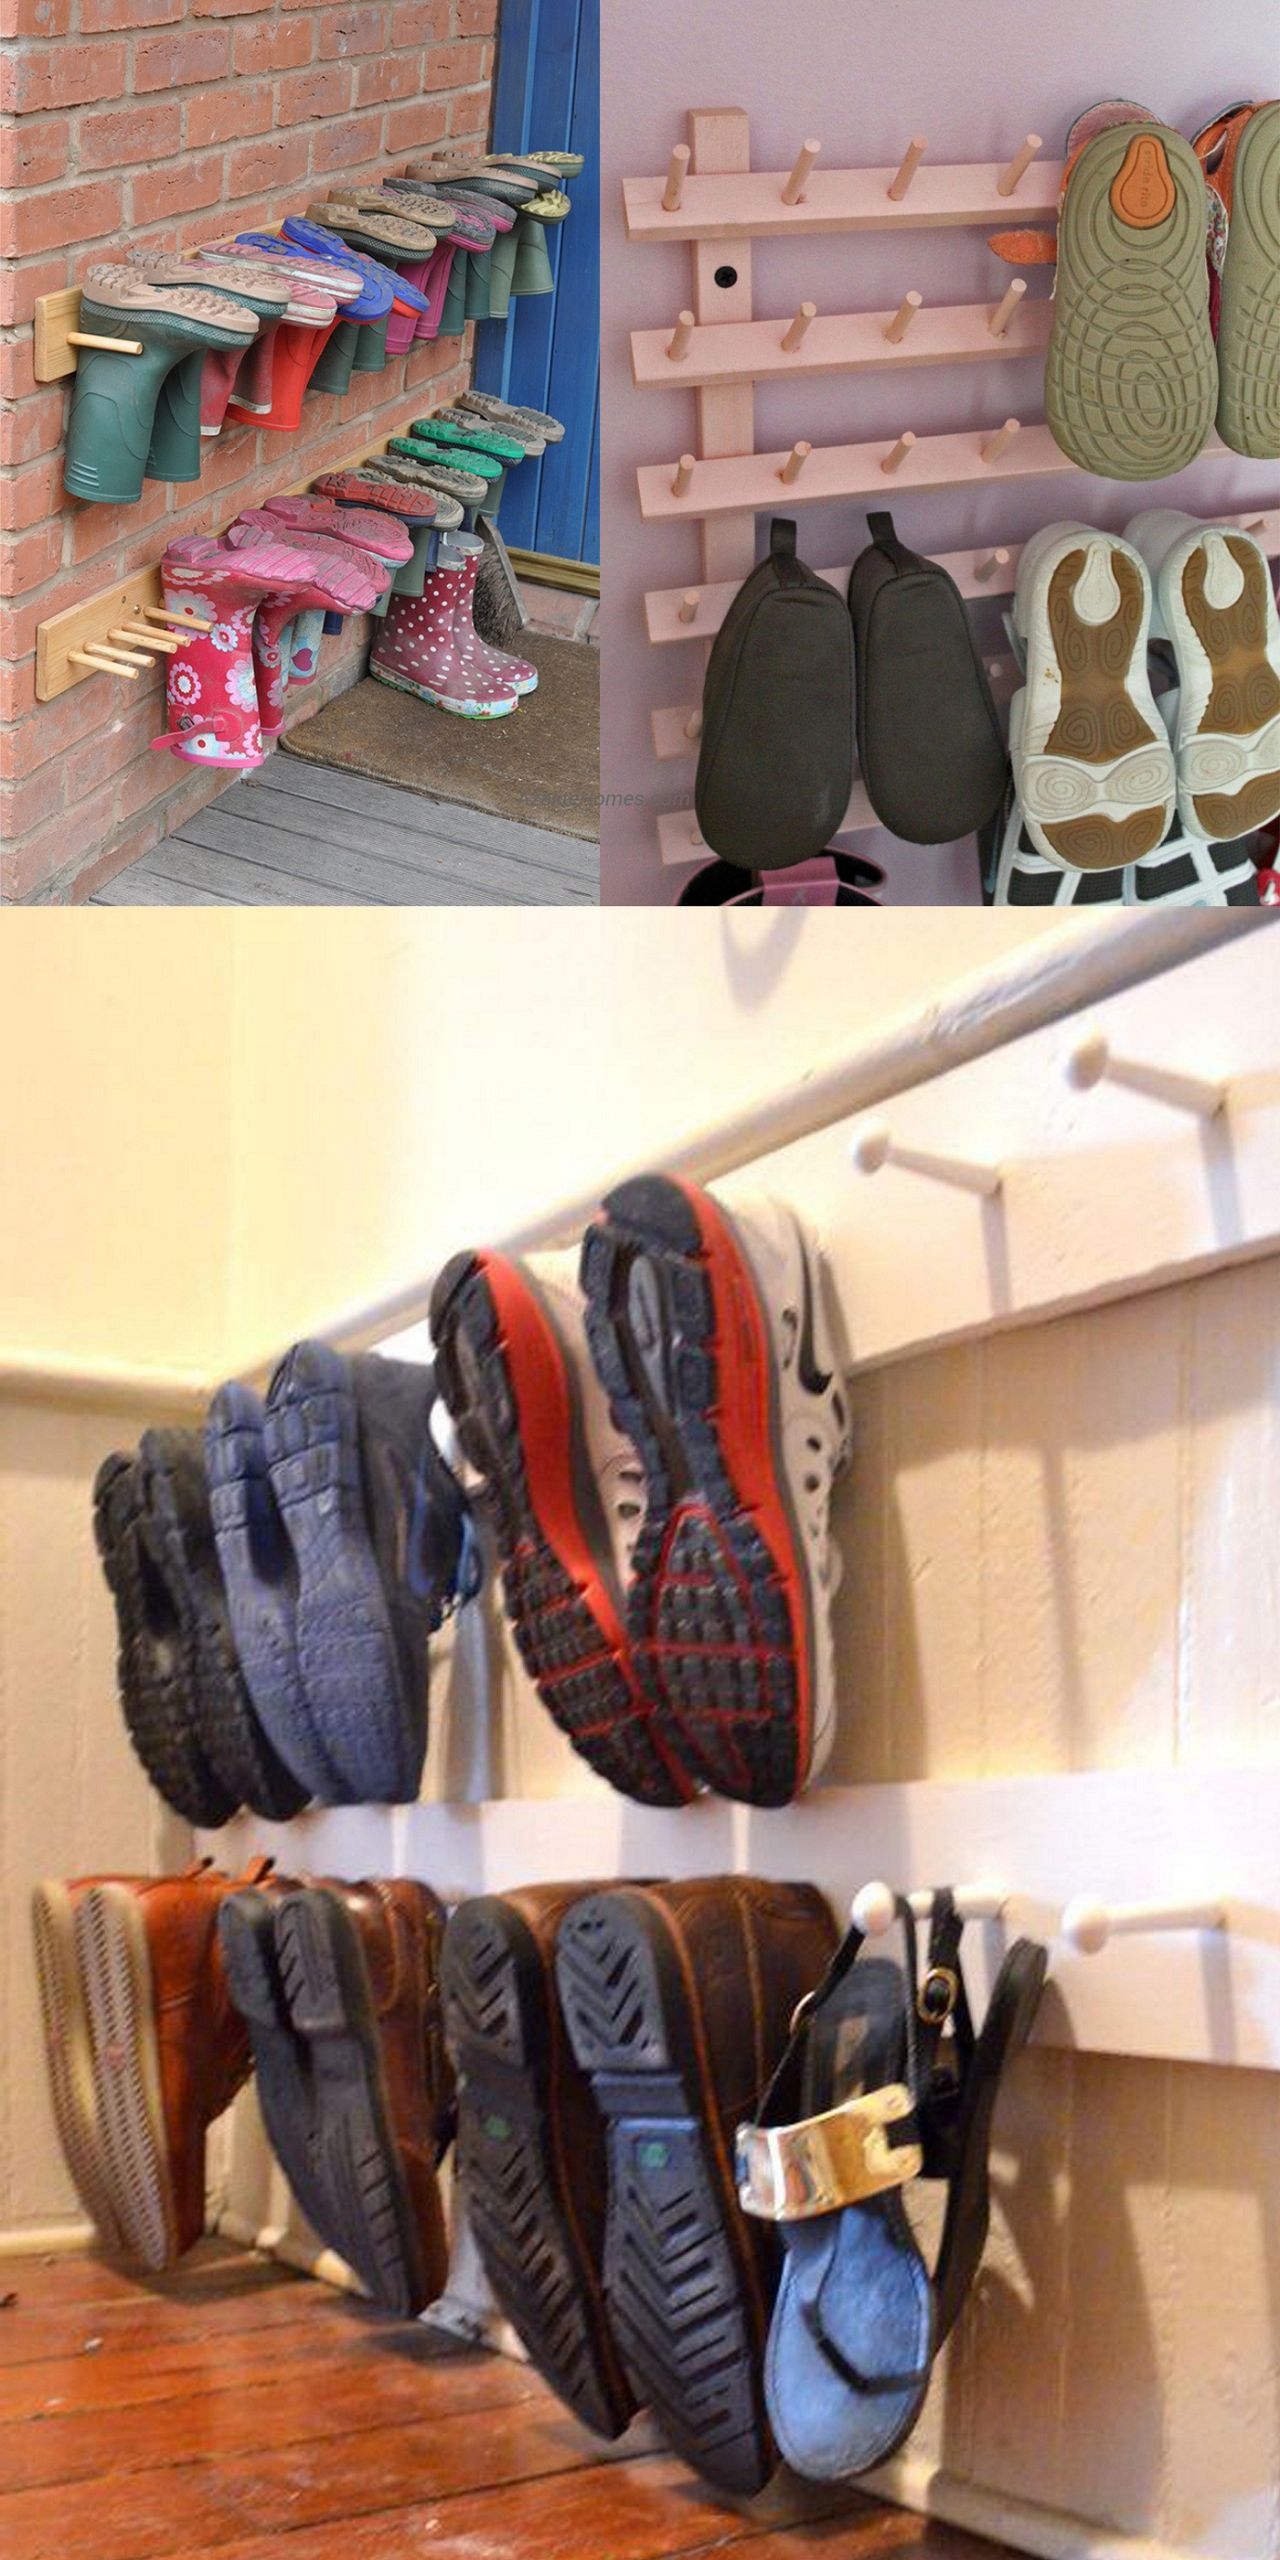 DIY Shoe Rack For Small Closet
 How to Organize Shoes in a Small Closet with Installing